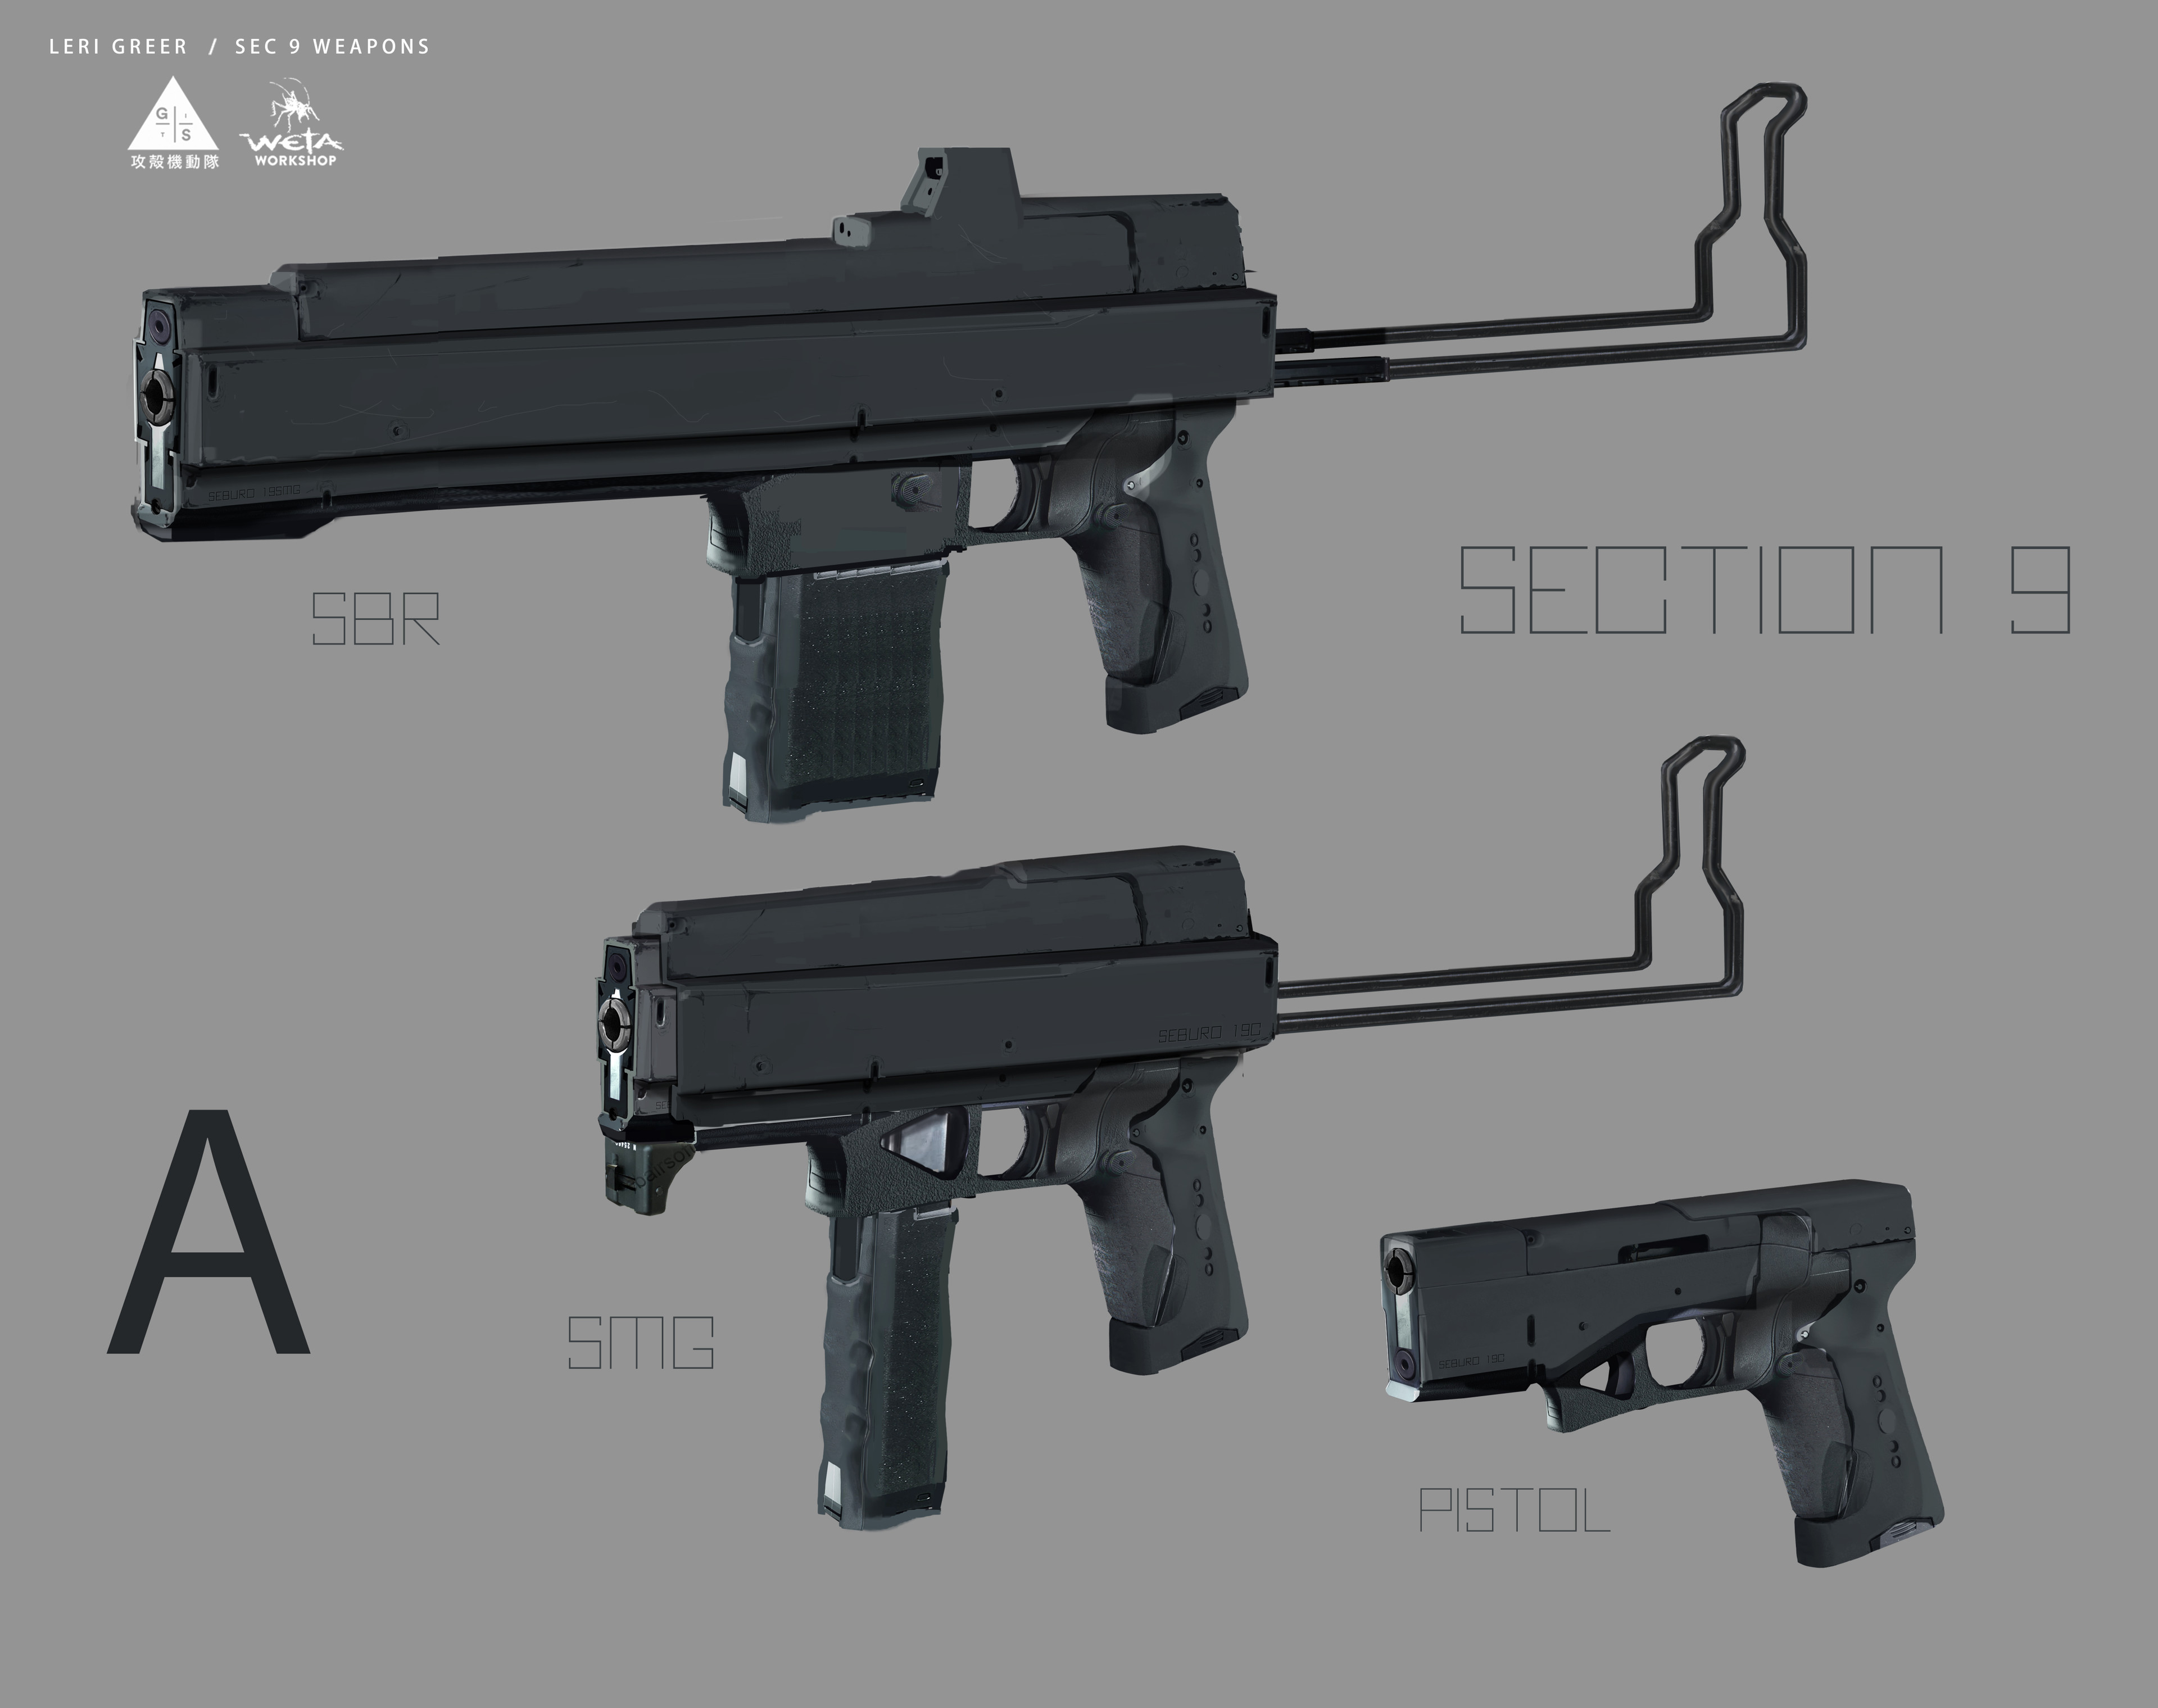 Section 9 Weapons - Artists: Leri Greer